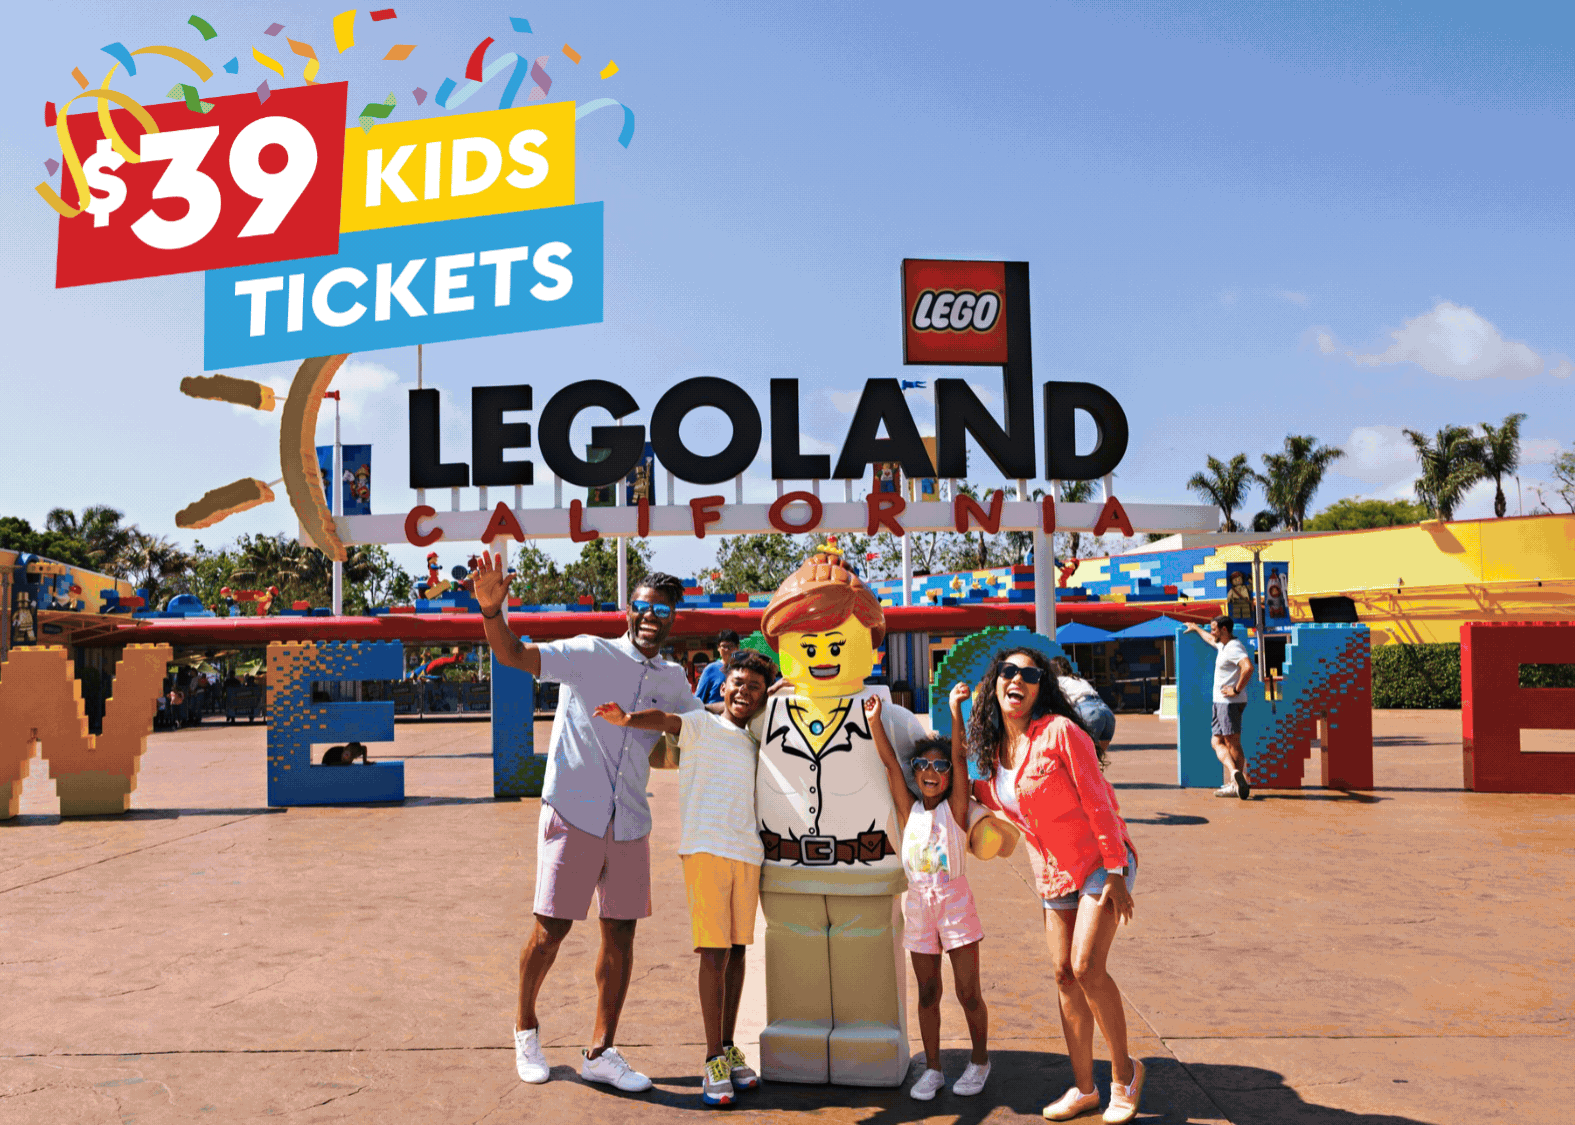 Explore the new Dino Valley at LEGOLAND California with $39 Kids tickets